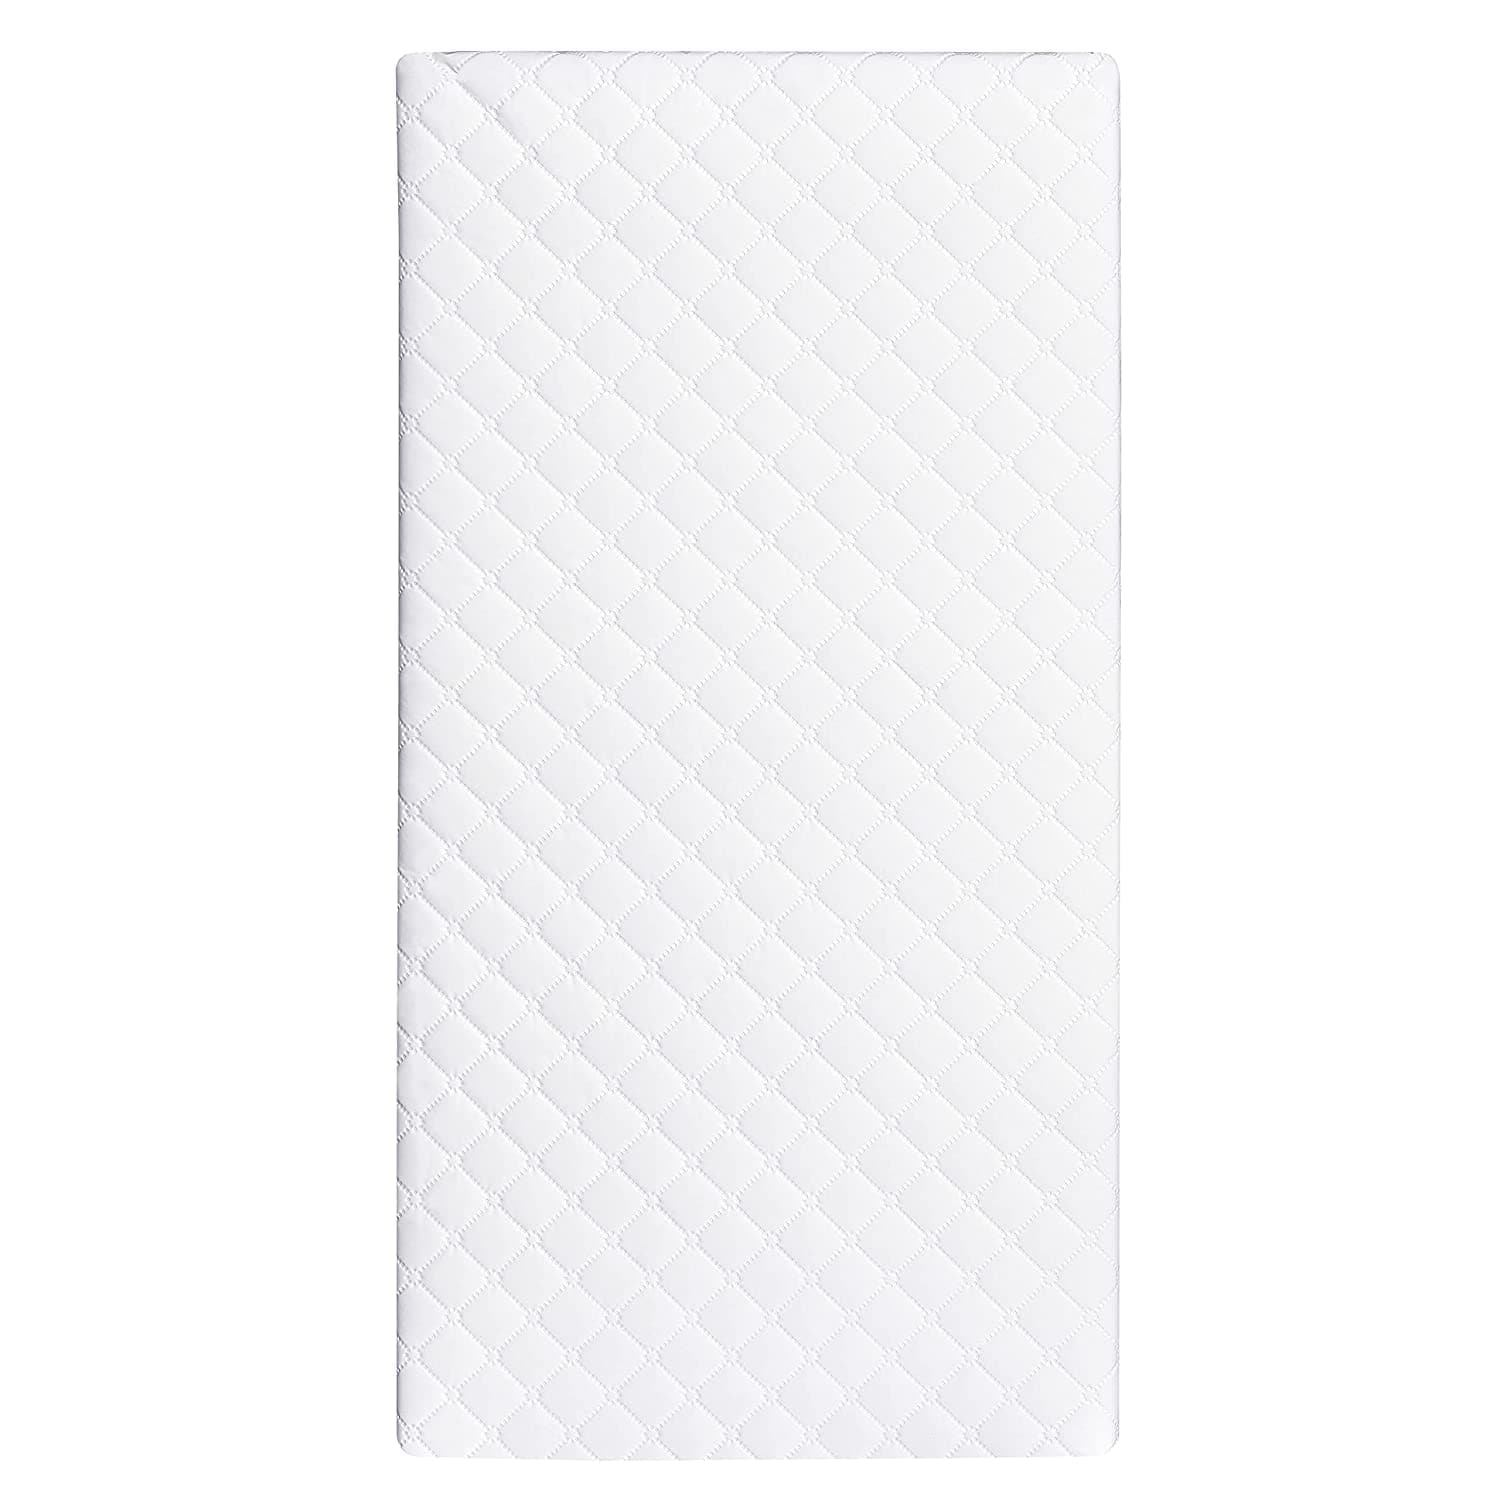 FYLO Foam Quilted Cot Mattress 60 x 120 cm - For Your Little One